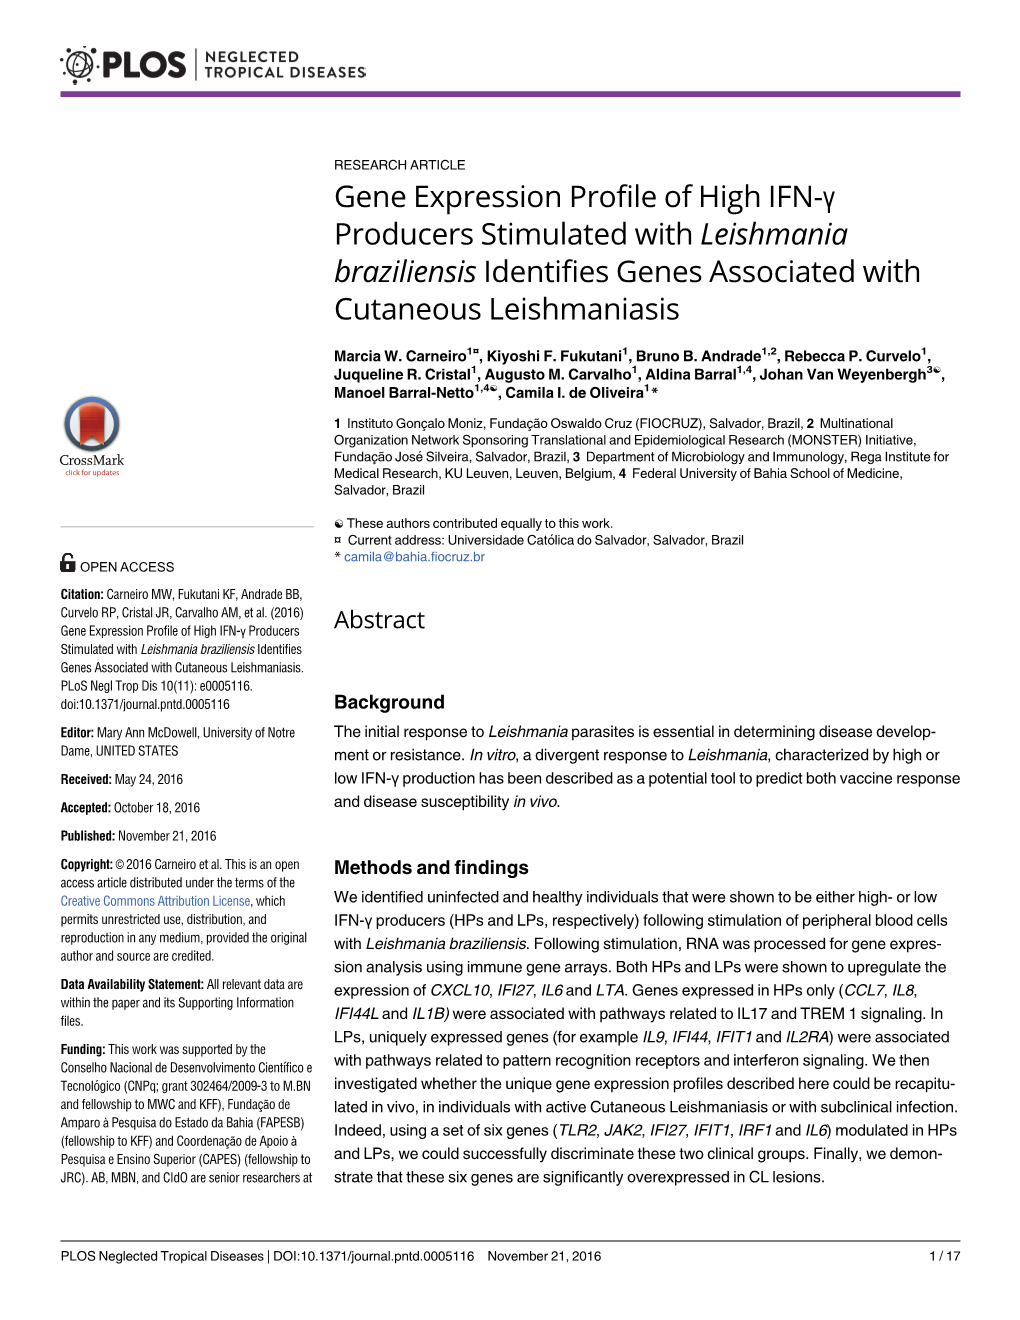 Gene Expression Profile of High IFN-Γ Producers Stimulated with Leishmania Braziliensis Identifies Genes Associated with Cutaneous Leishmaniasis